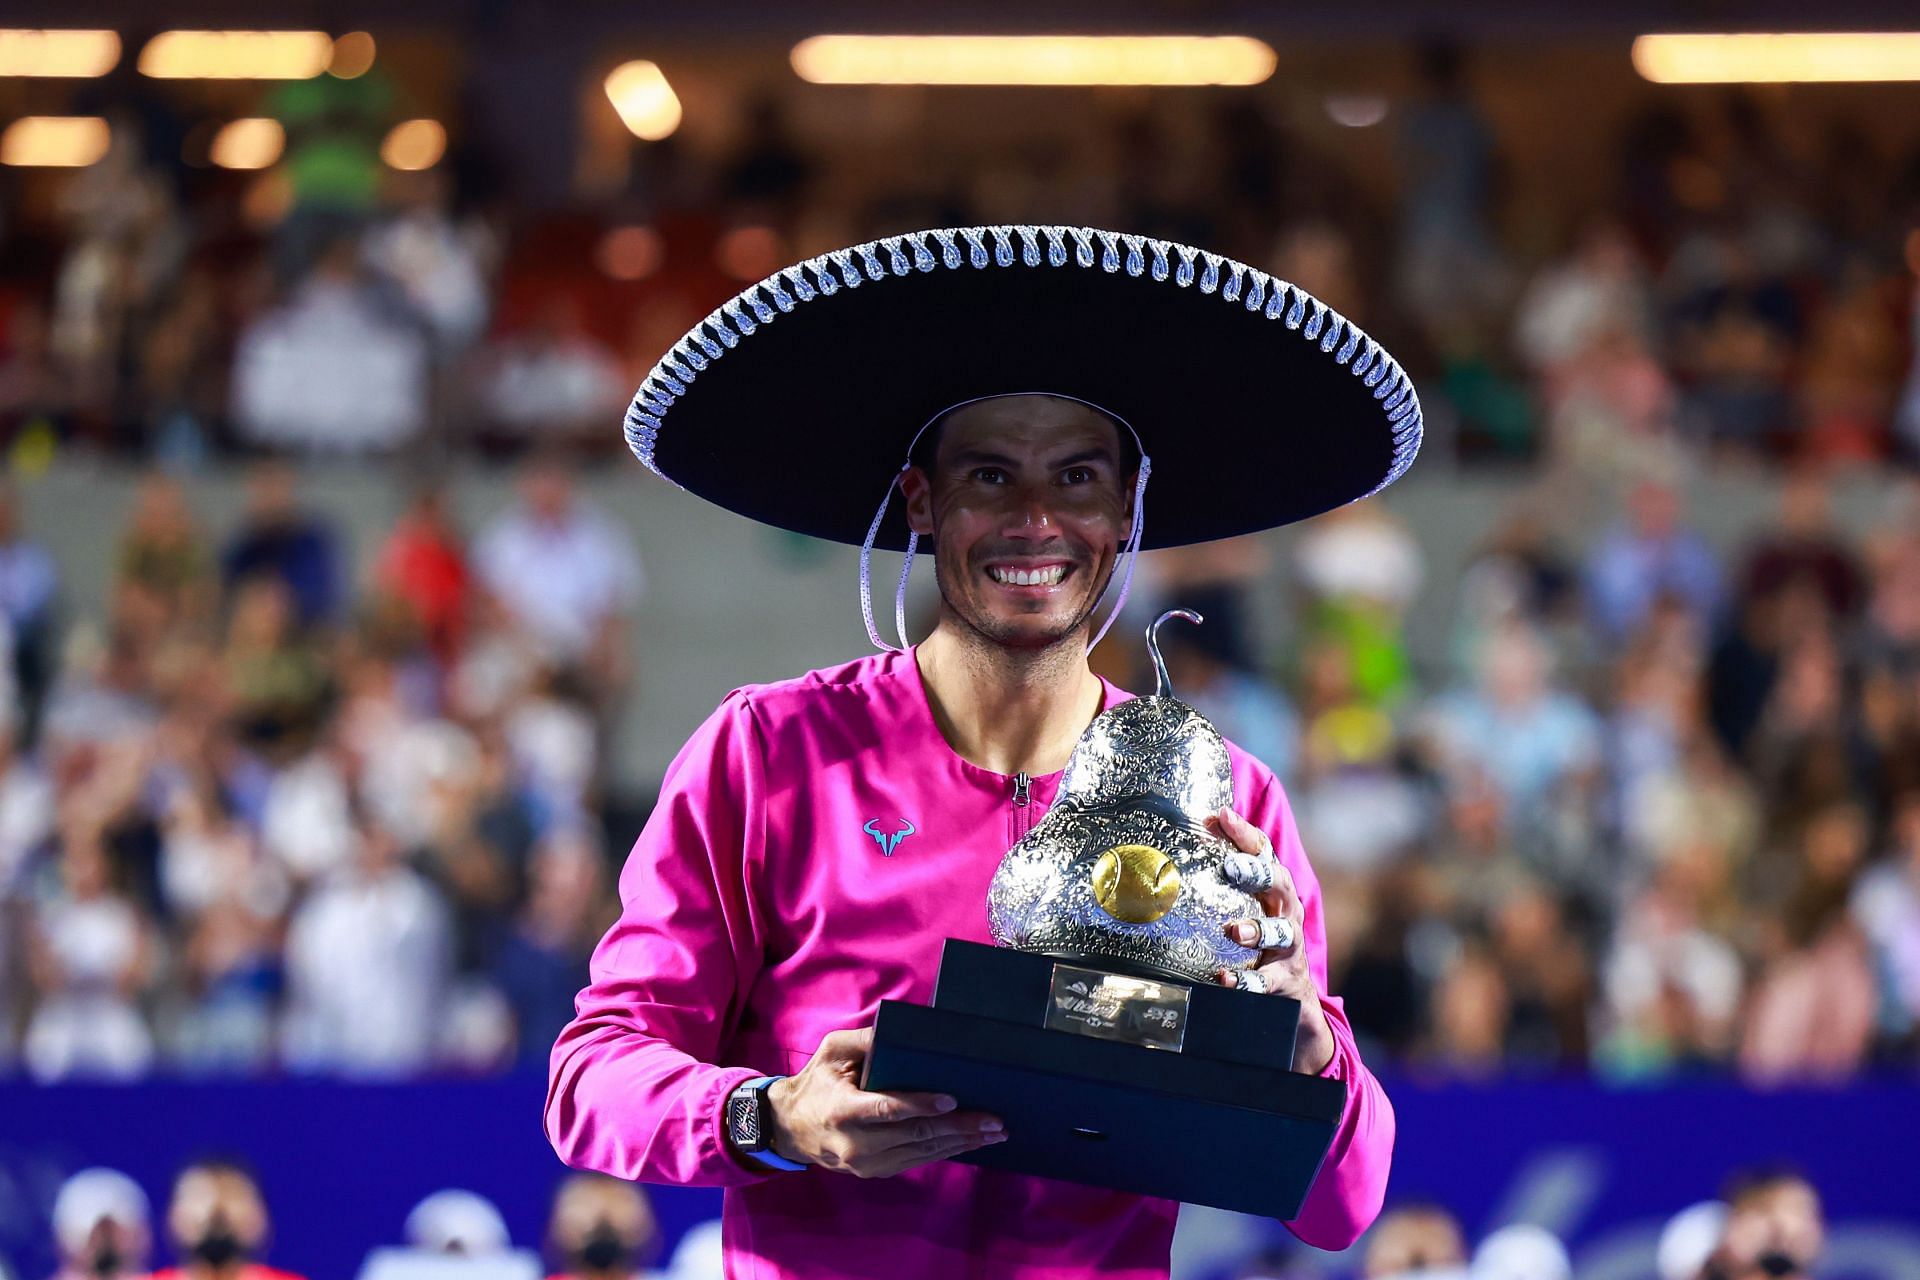 A jubilant Nadal after winning the Telcel ATP Mexican Open 2022